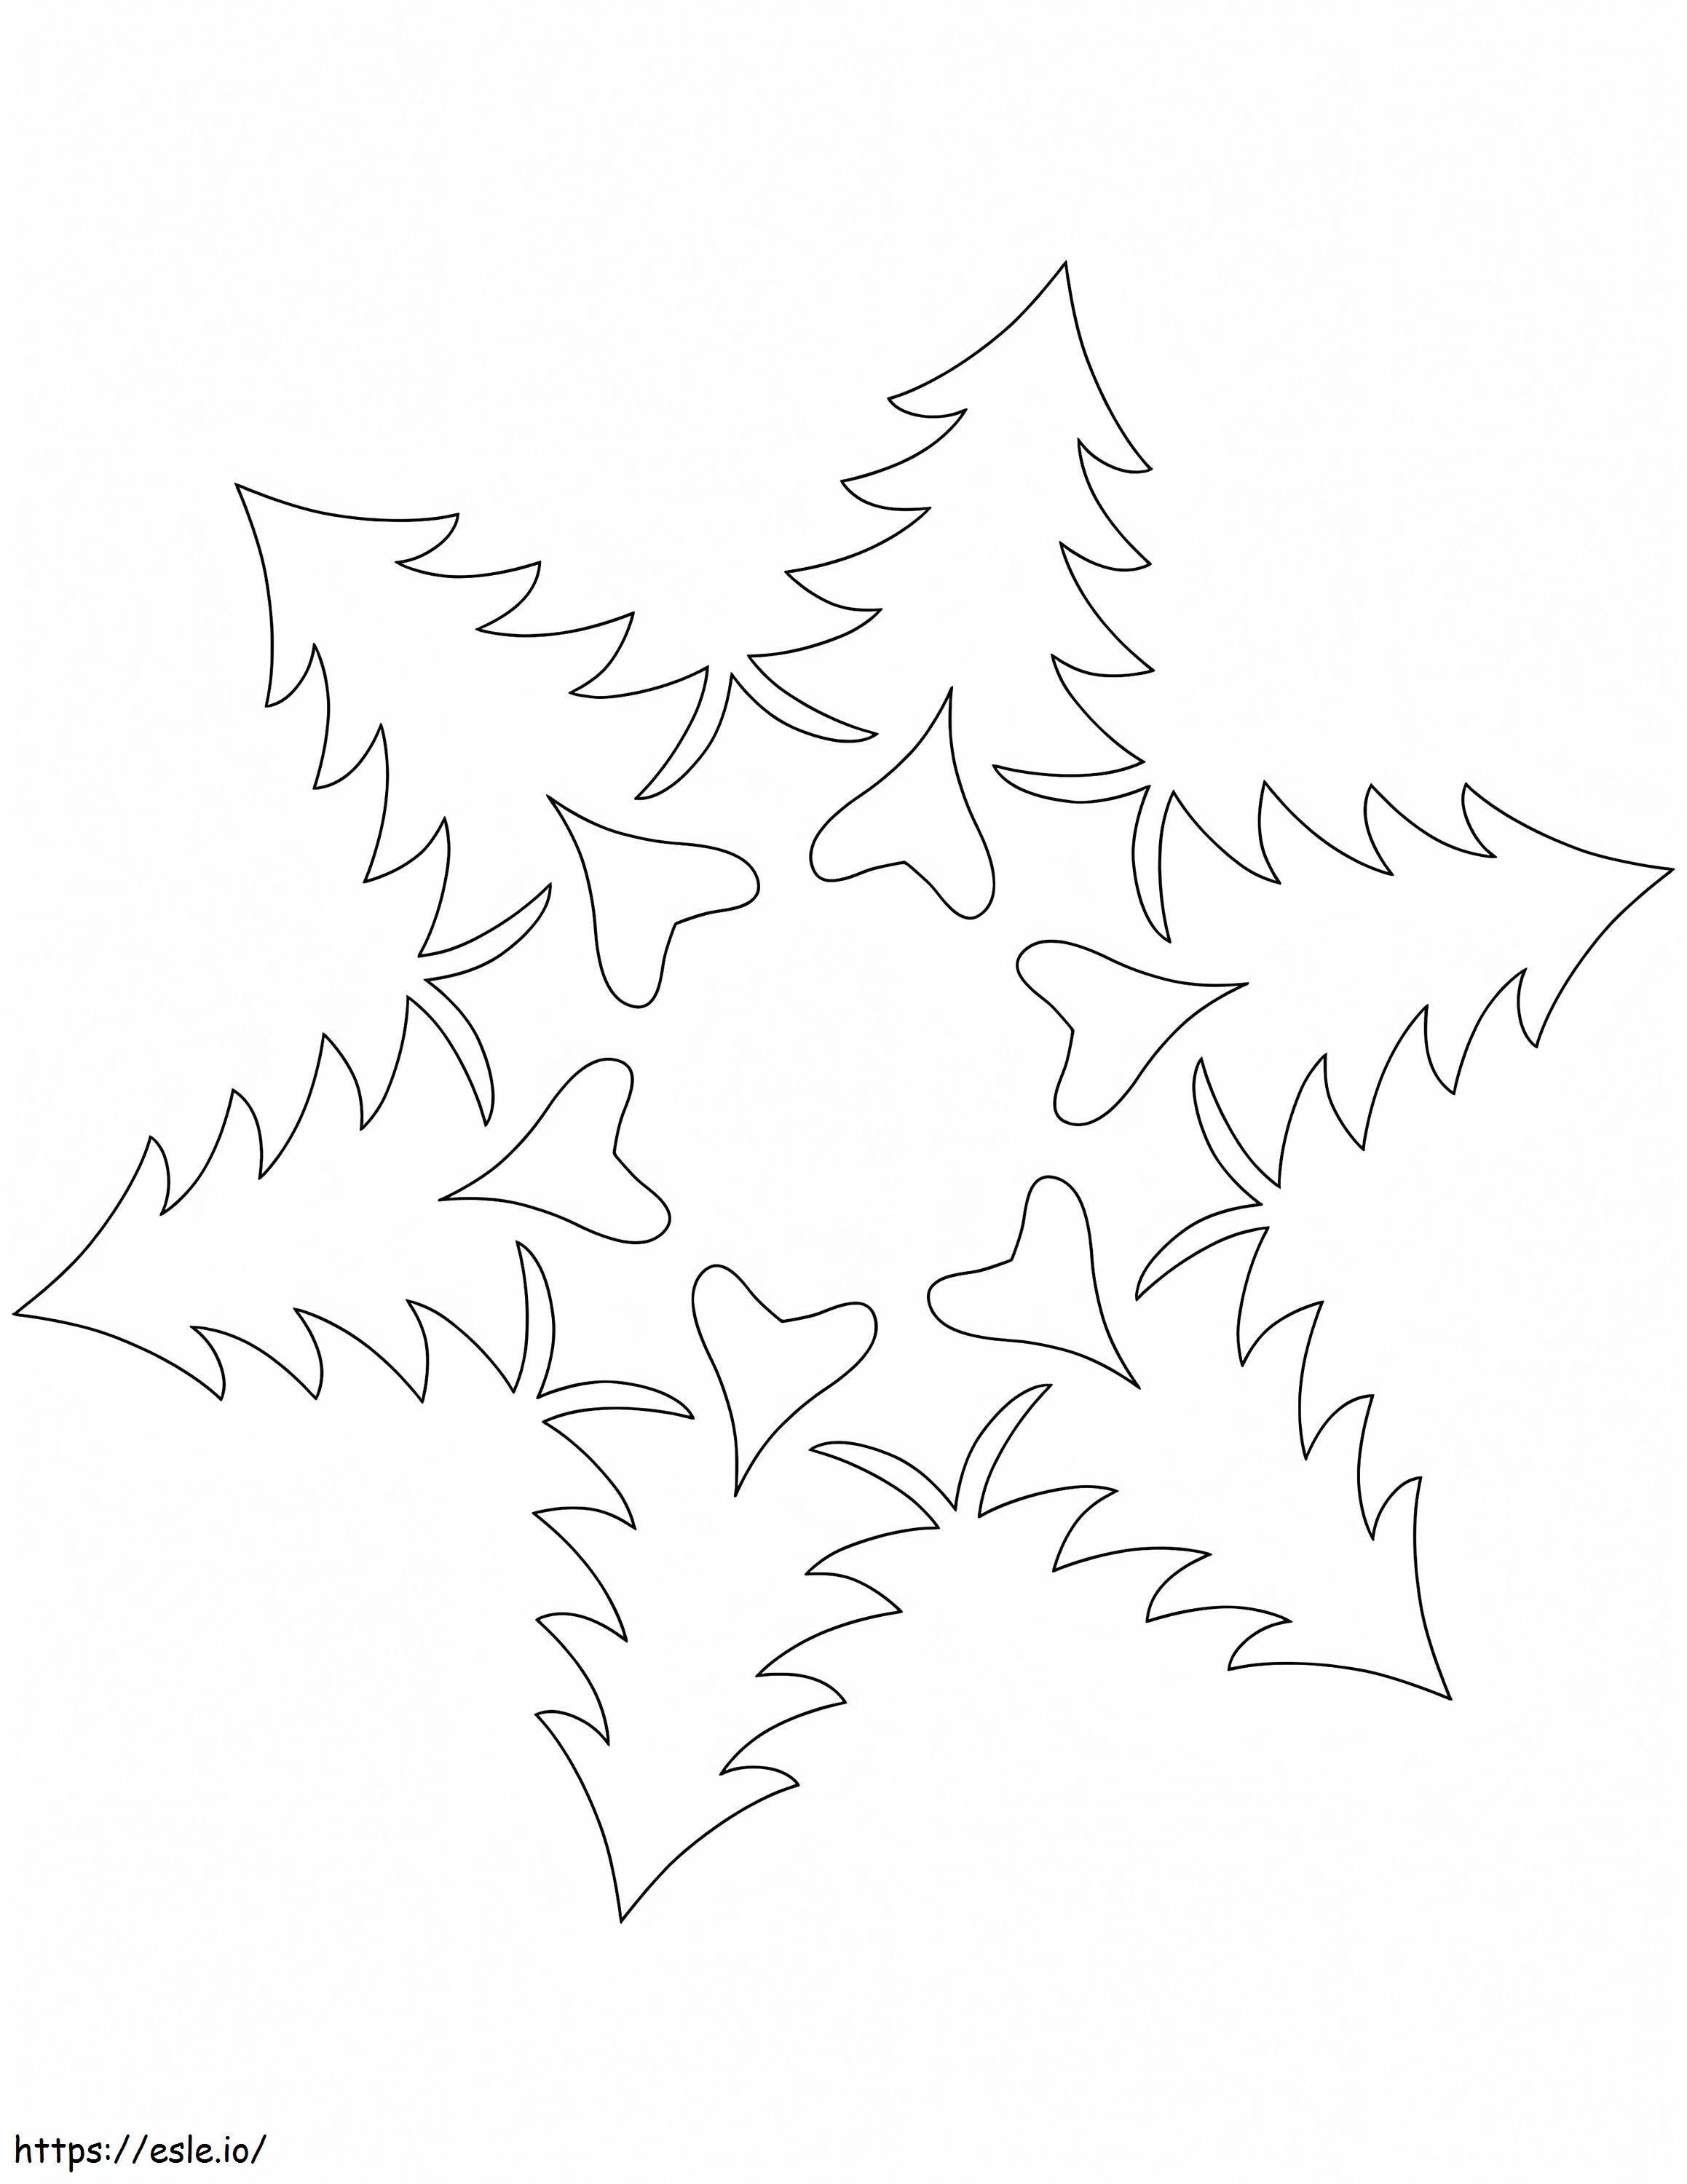 1584004128 Snowflake Pattern With Christmas Trees coloring page